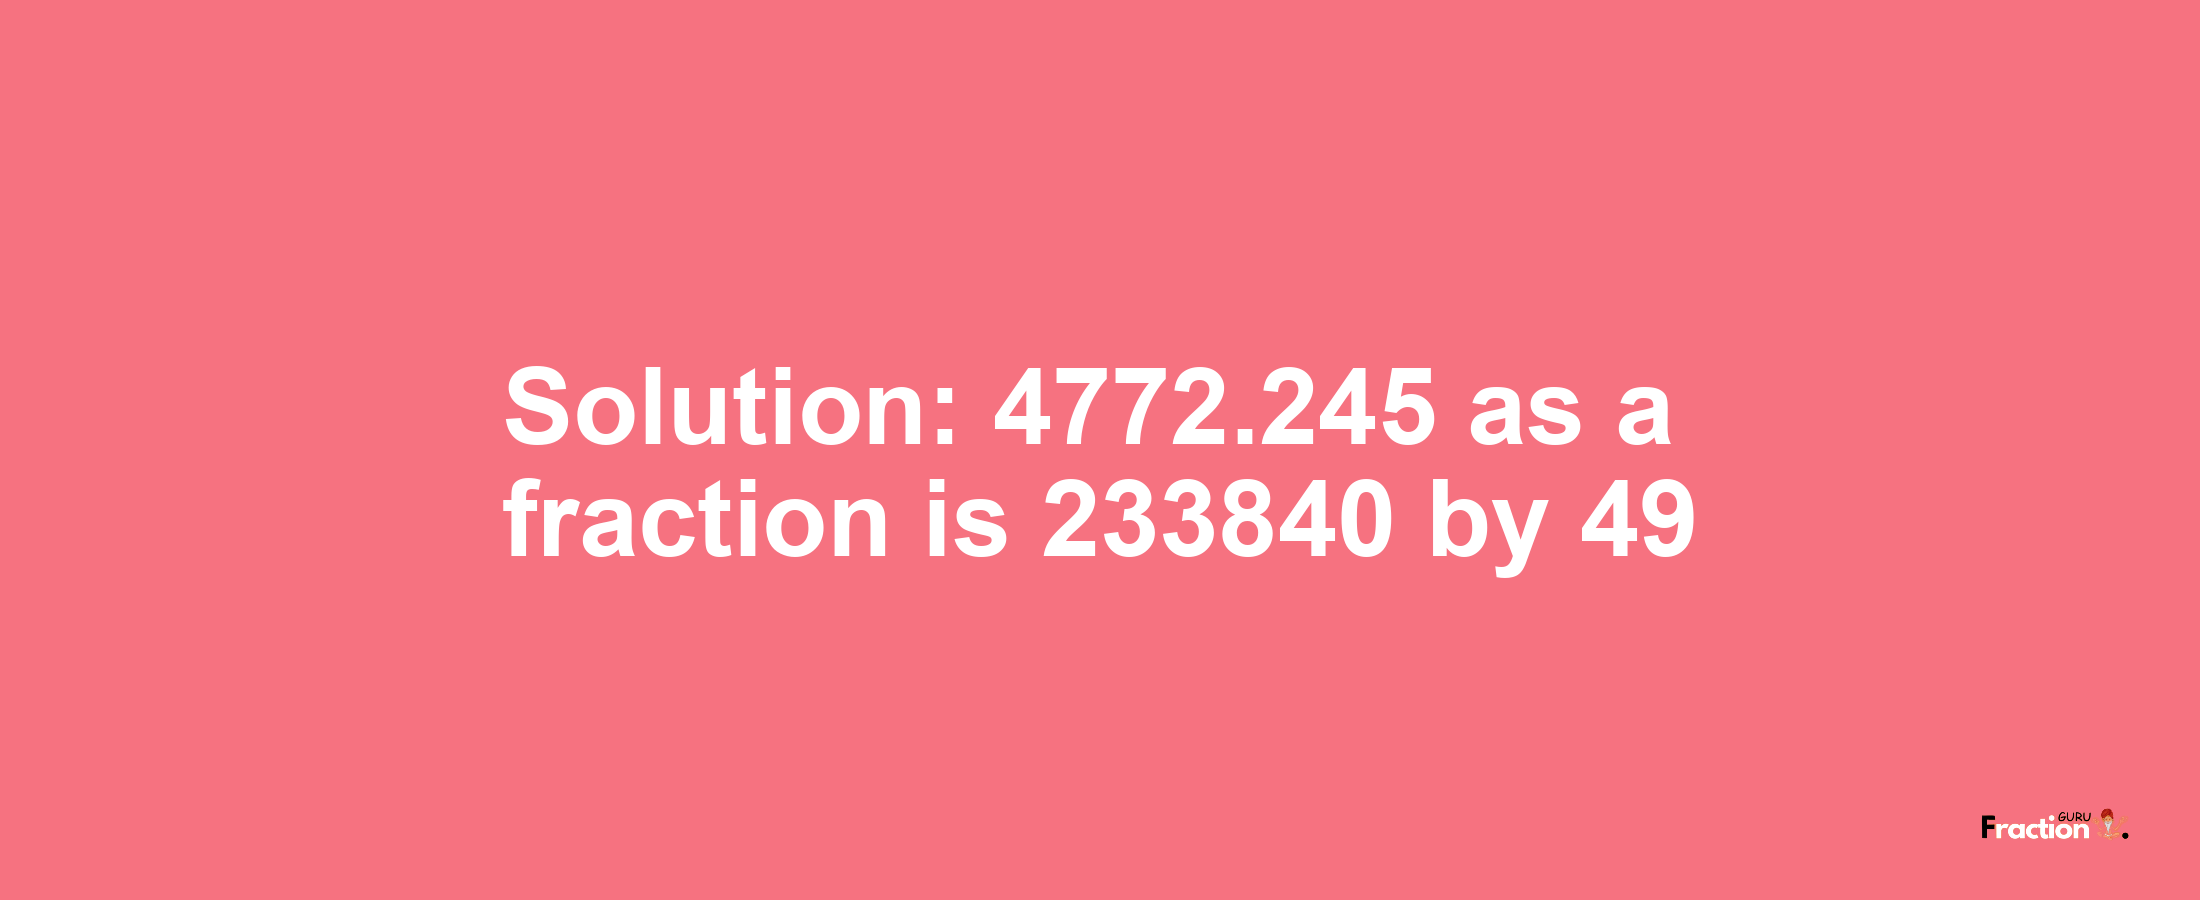 Solution:4772.245 as a fraction is 233840/49